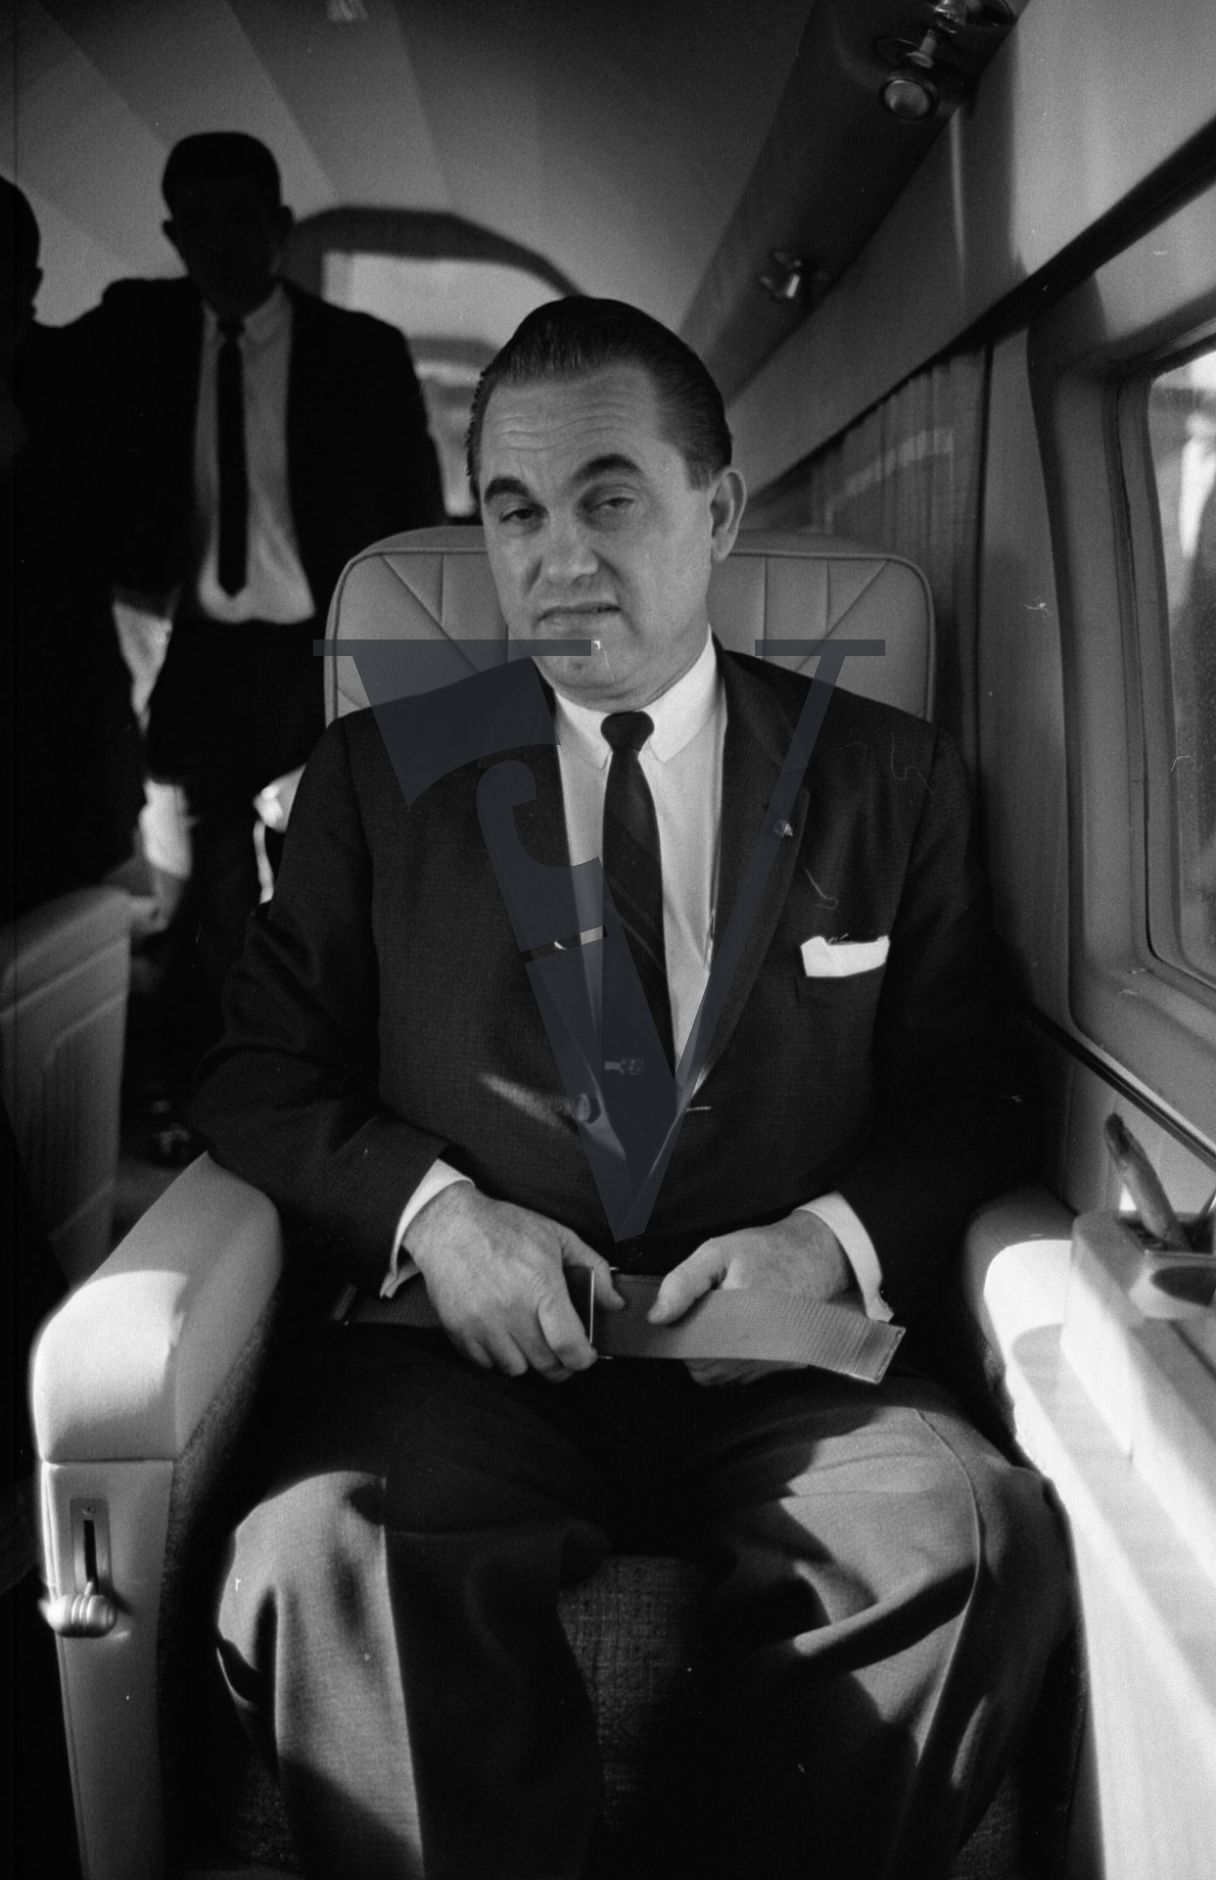 Governor George Wallace, on board plane, portrait, blinking.